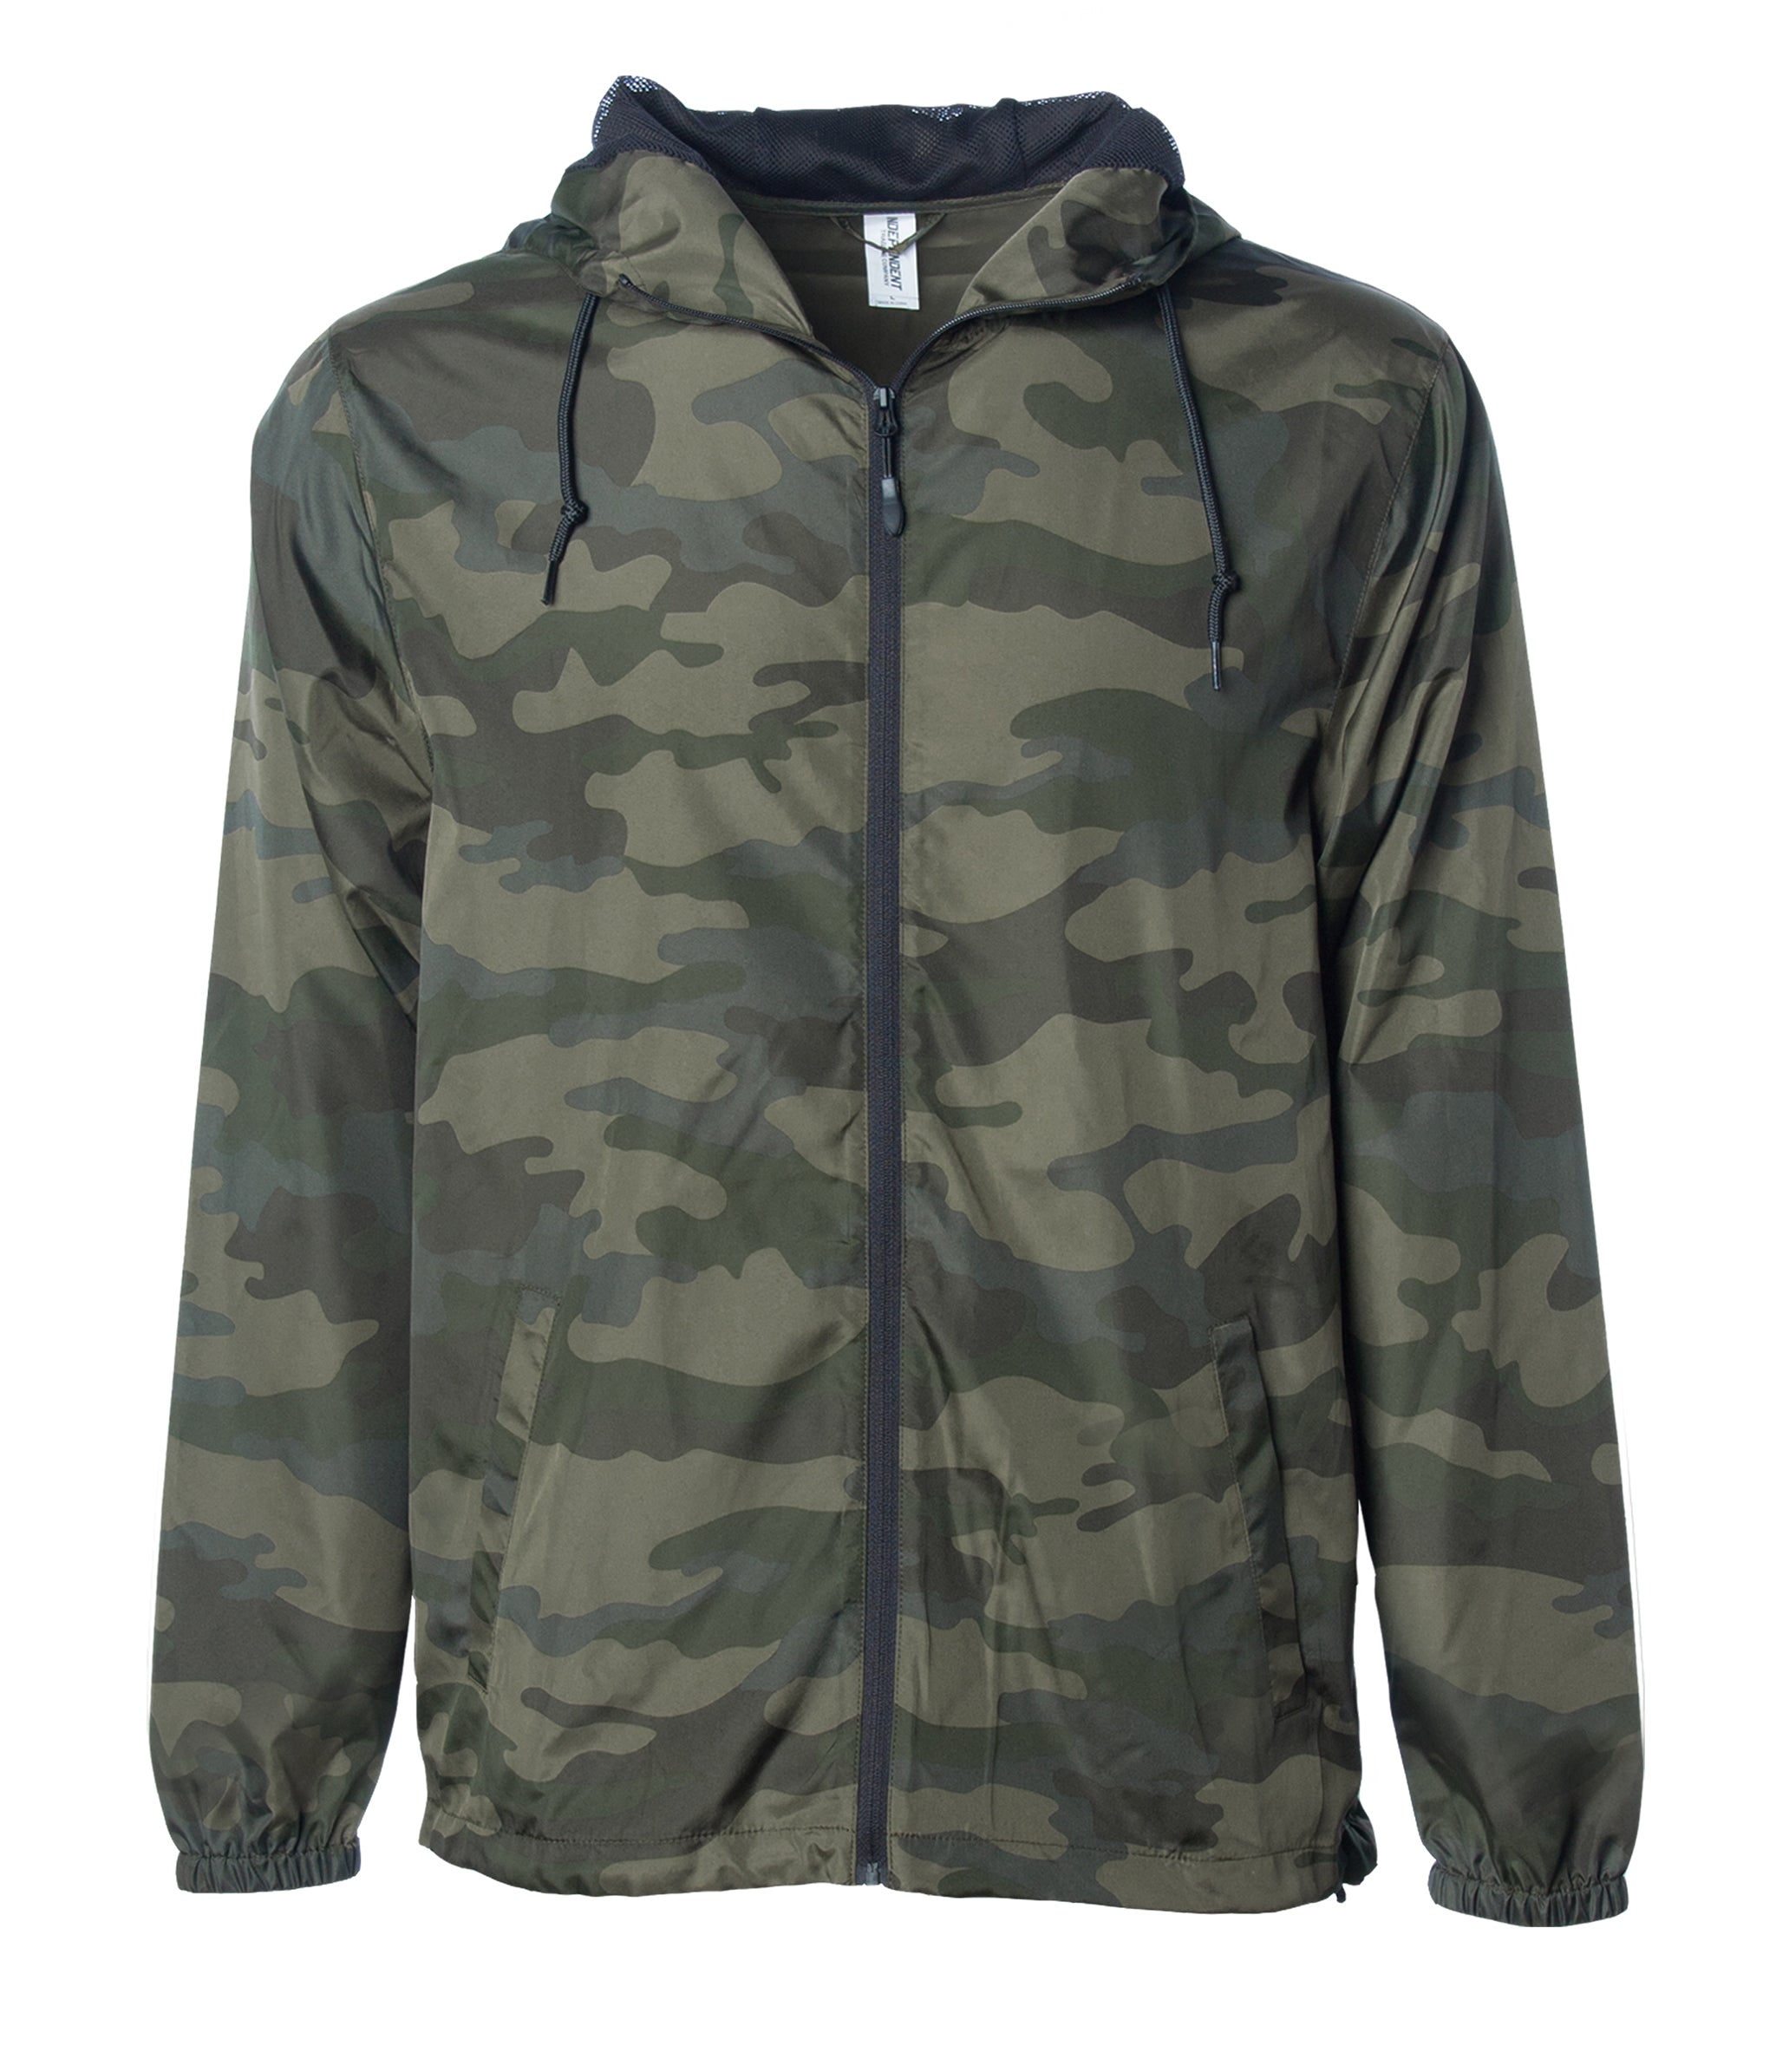 Independent Trading Company Lightweight Windbreaker Jacket, Forest Camo / Xs